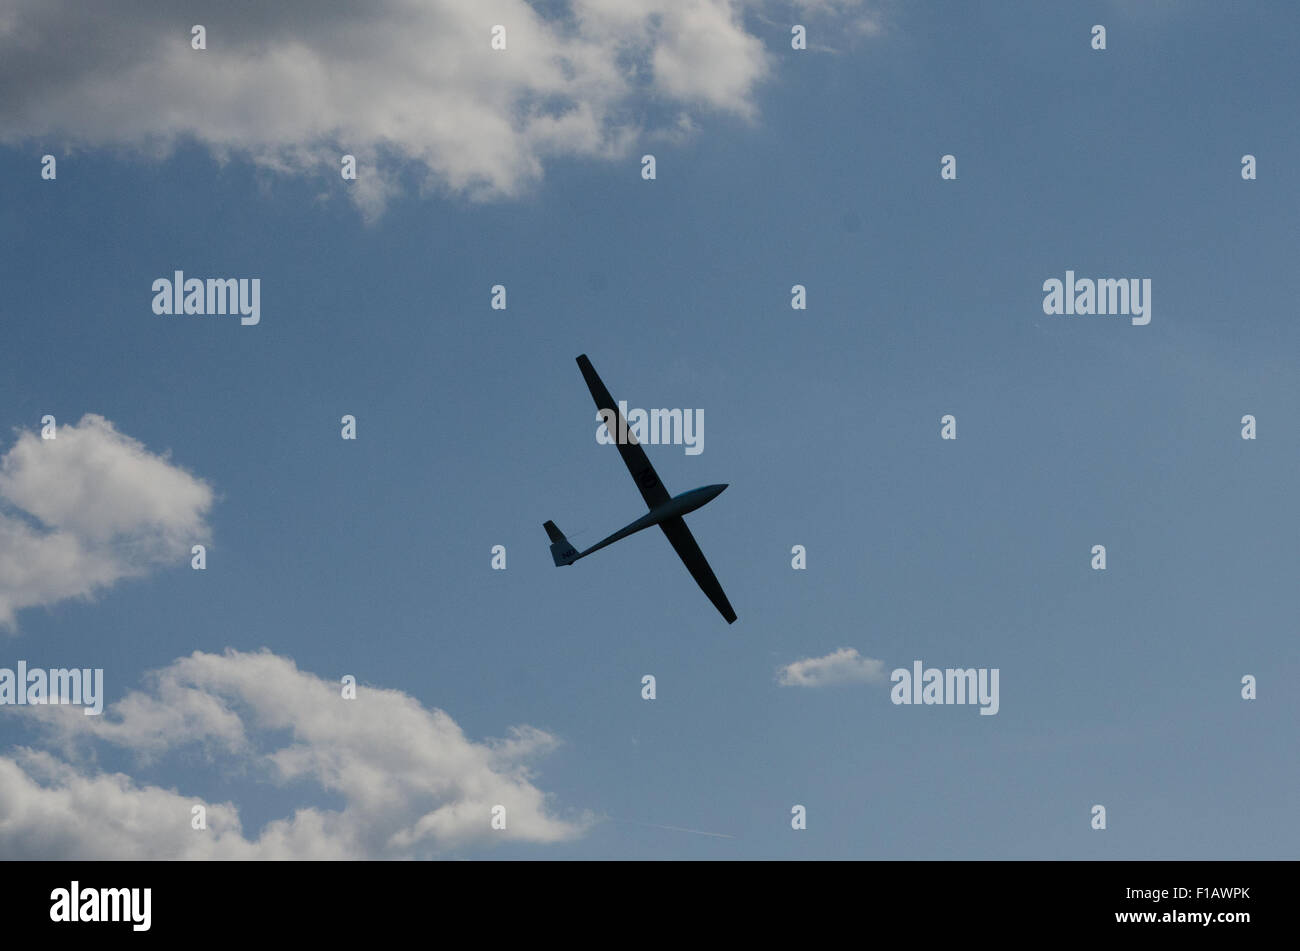 Sailplane makes approach to touch down. Stock Photo